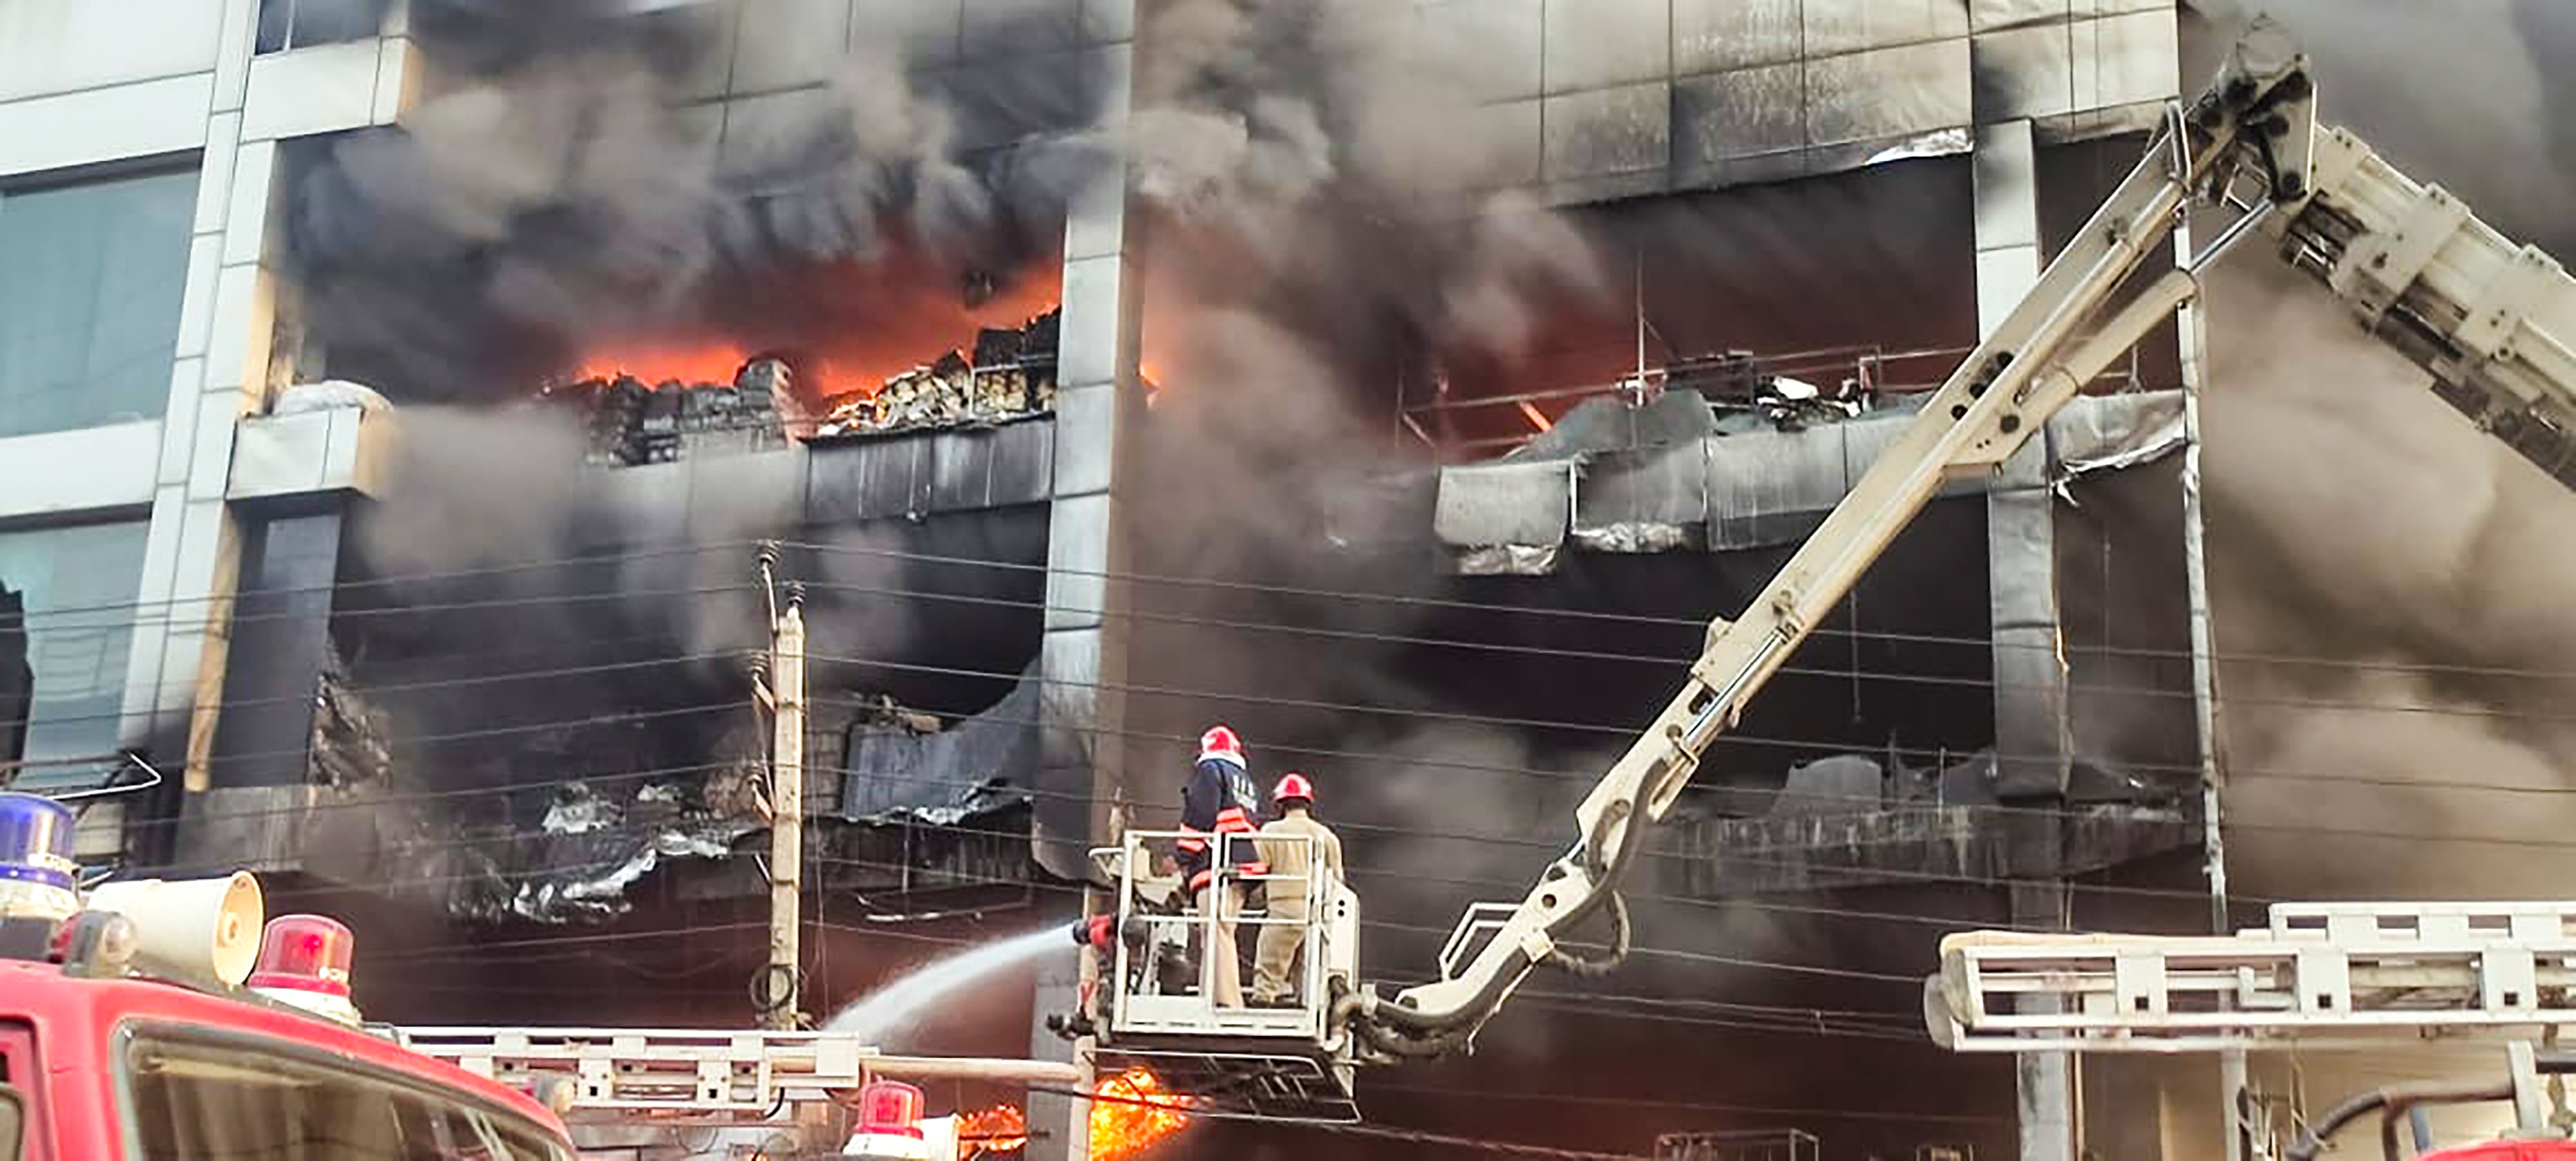 Mundka fire: Building had one escape route, toll may rise with more remains found and 29 people missing